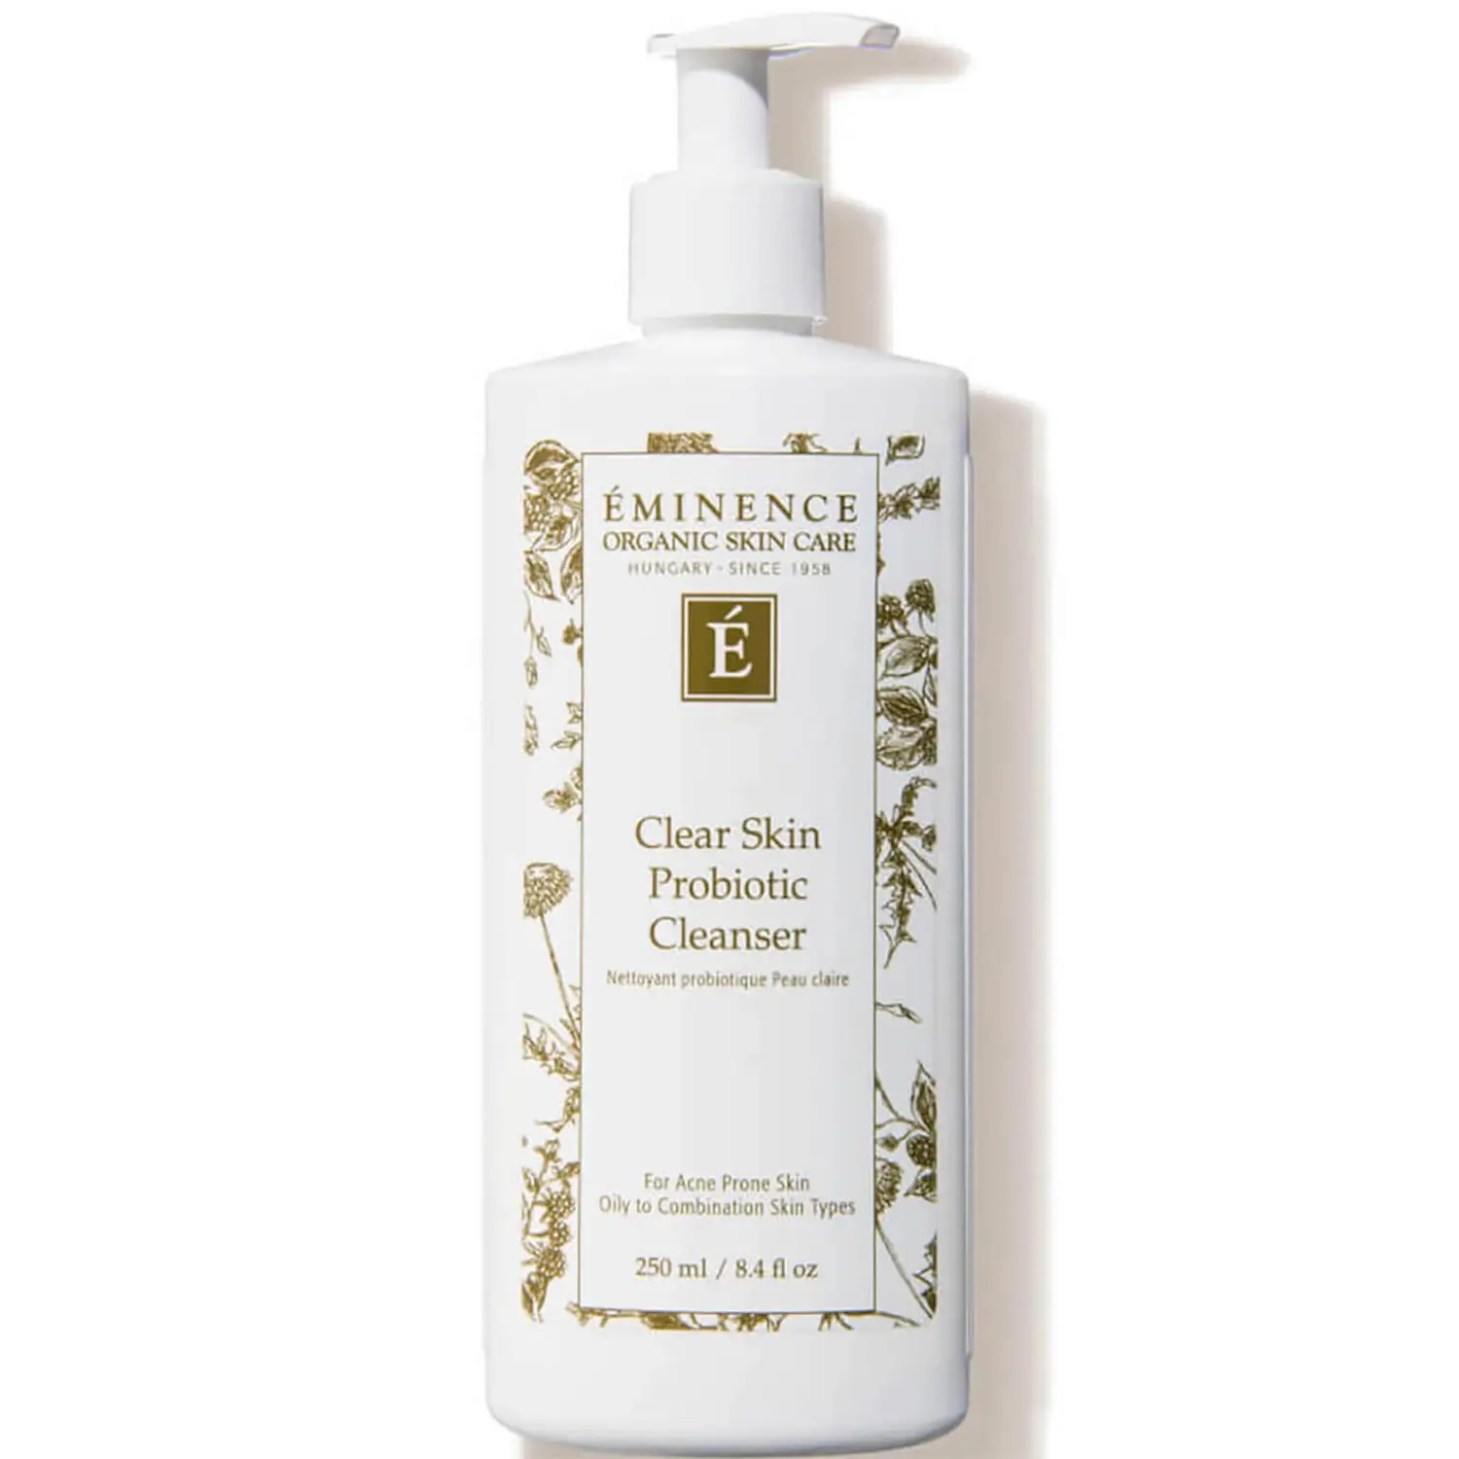 A white bottle of Eminence Organic Cleanser